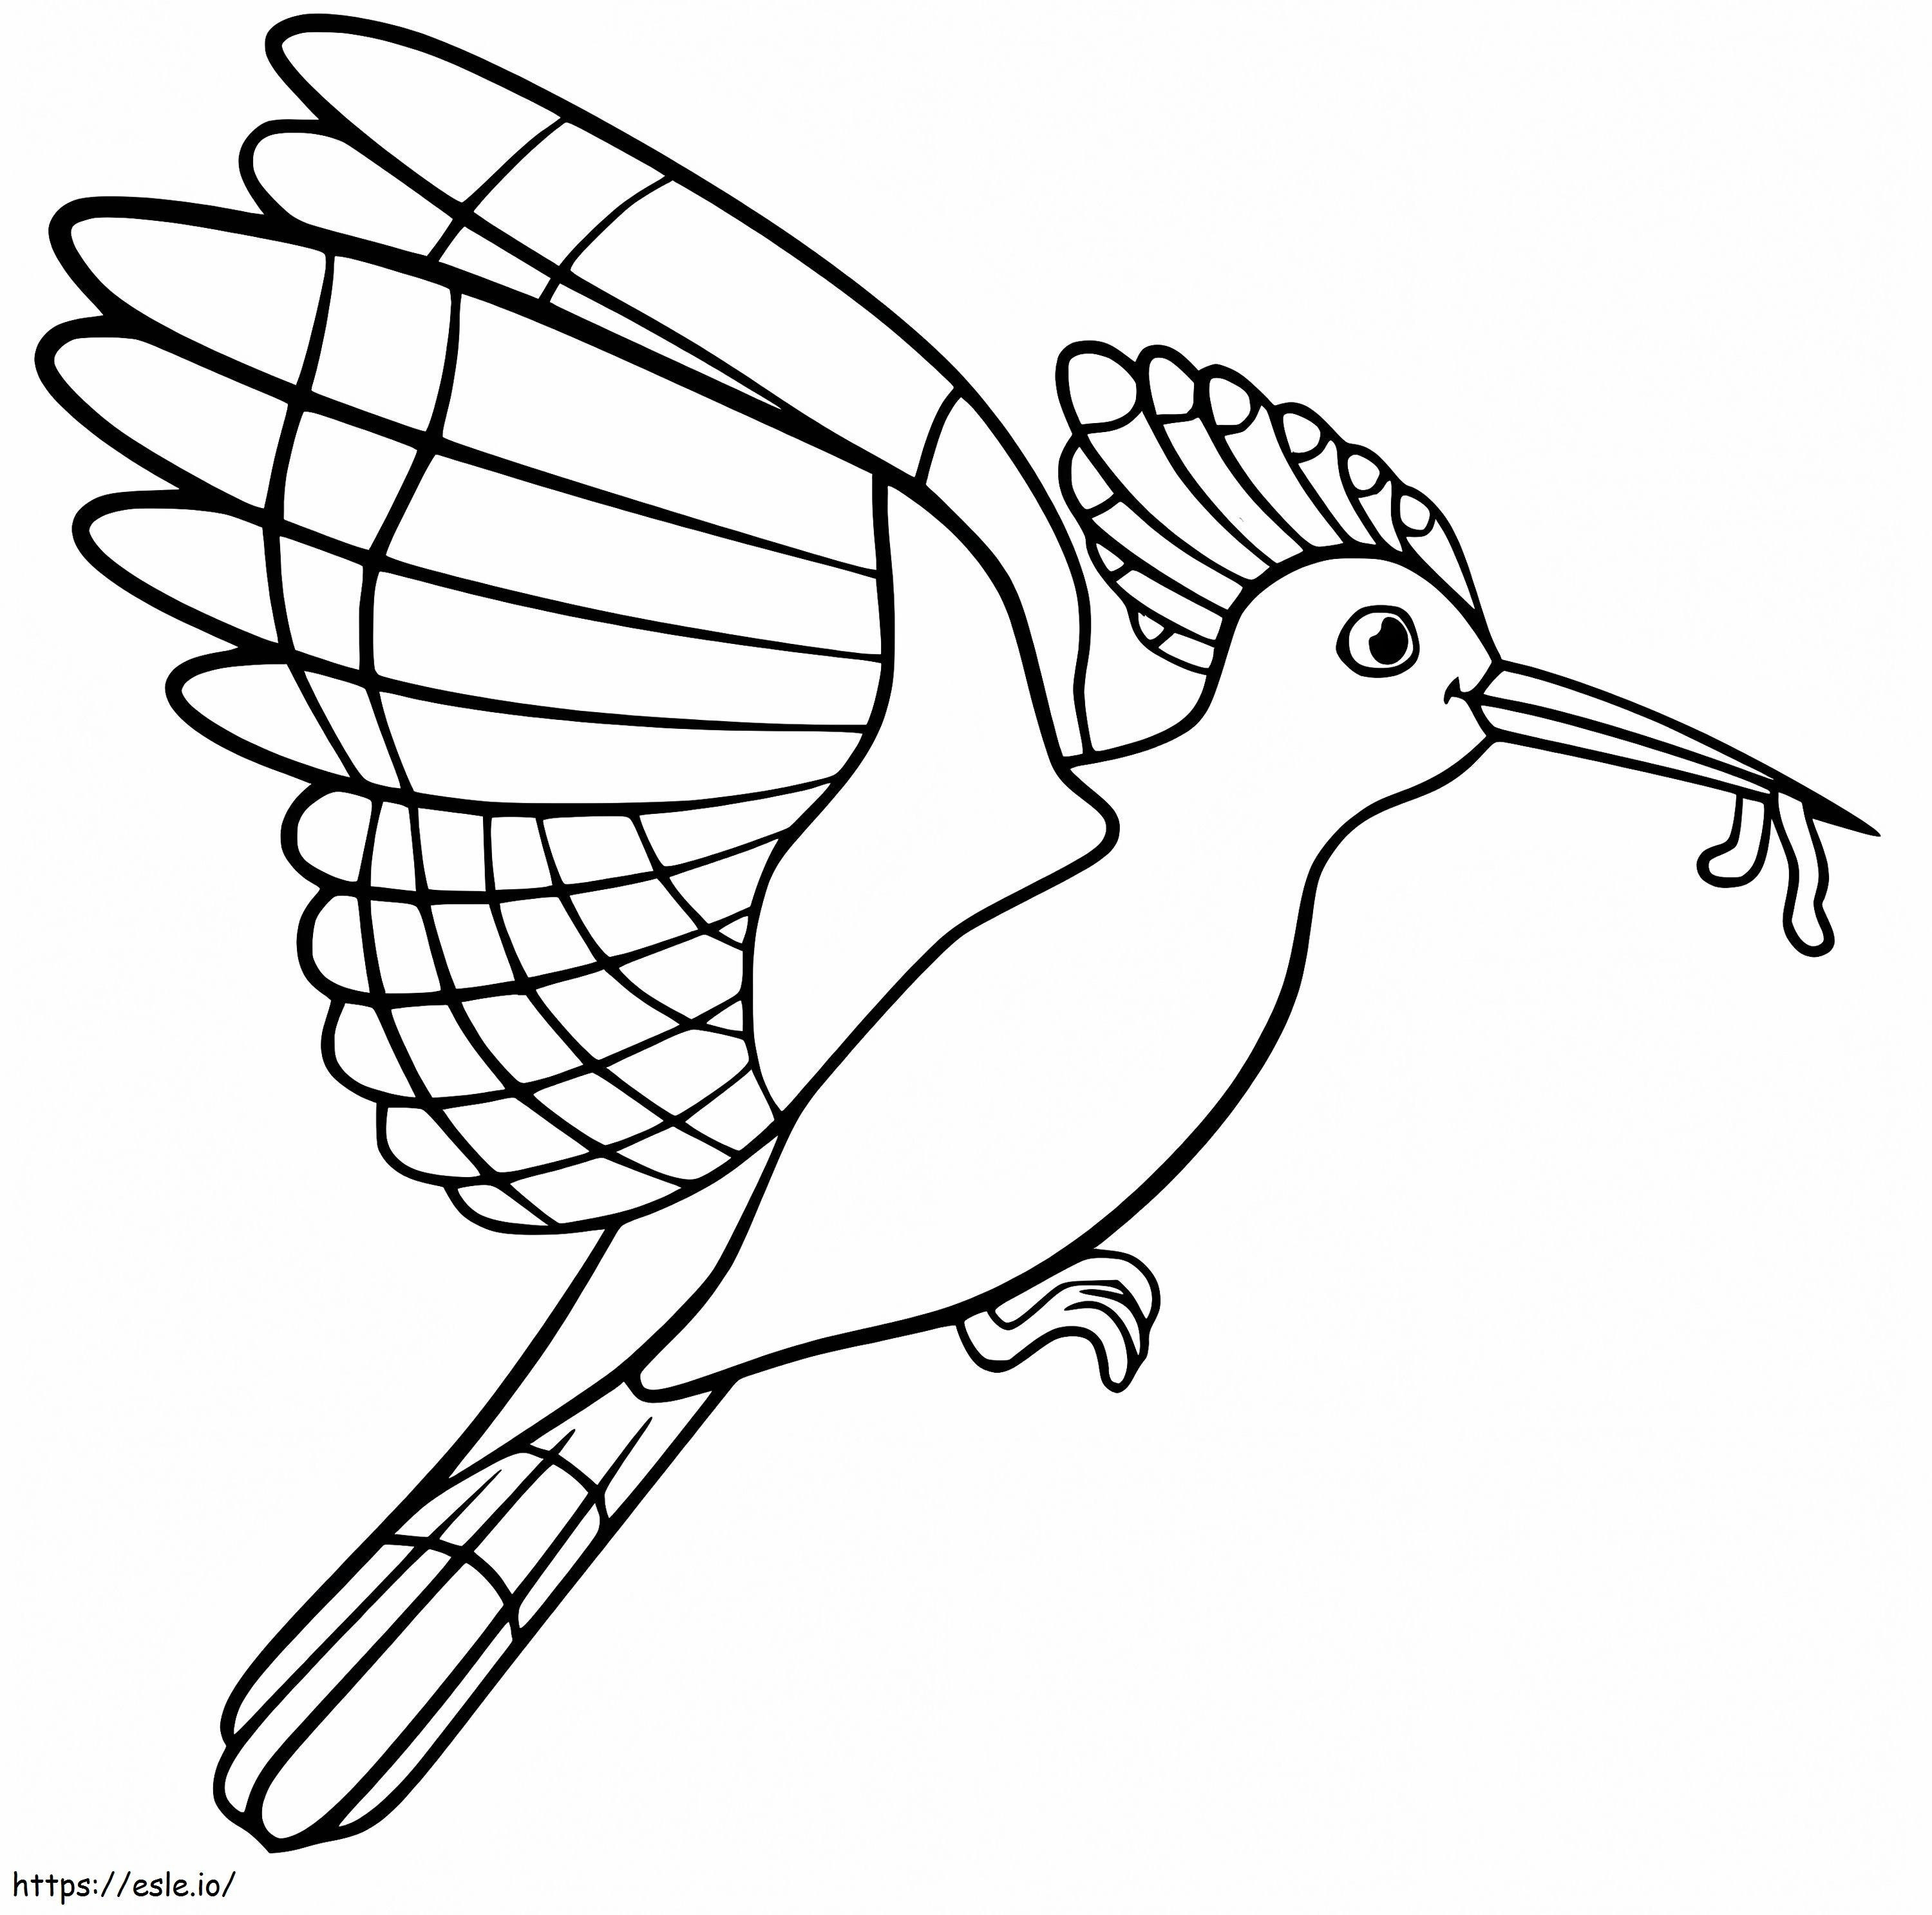 Hoopoe And Worm coloring page